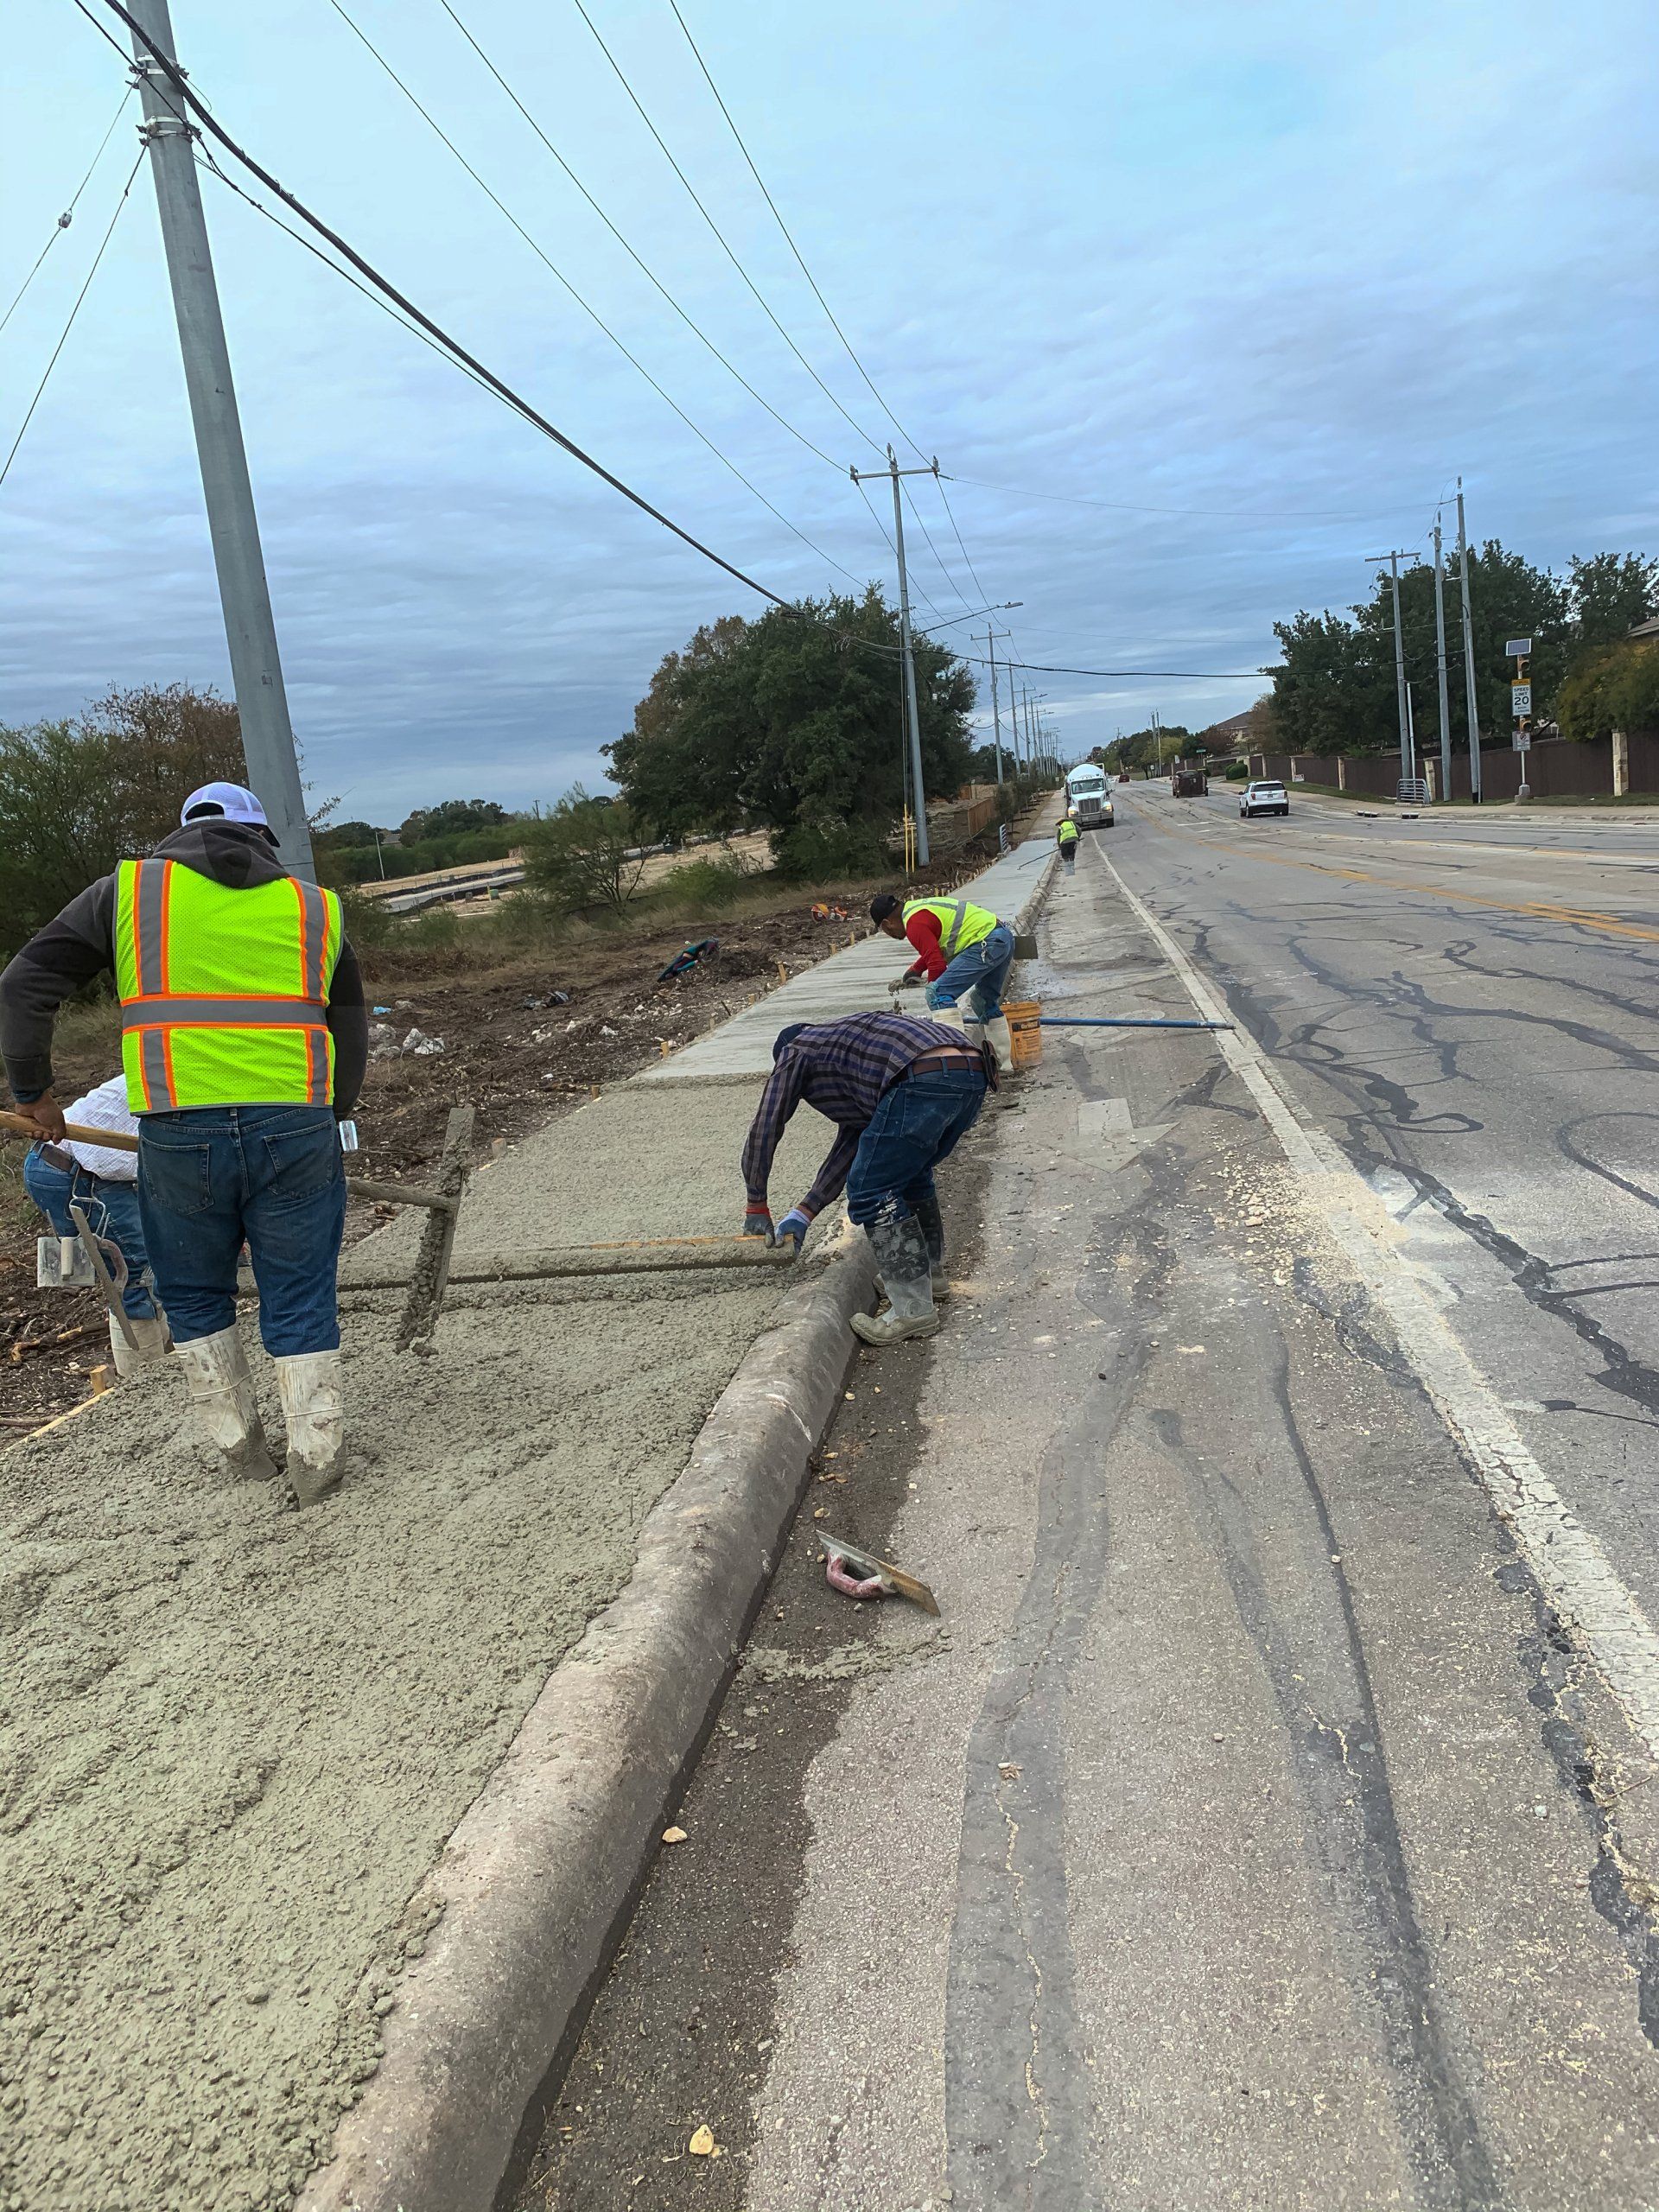 A group of construction workers are working on the side of a road.